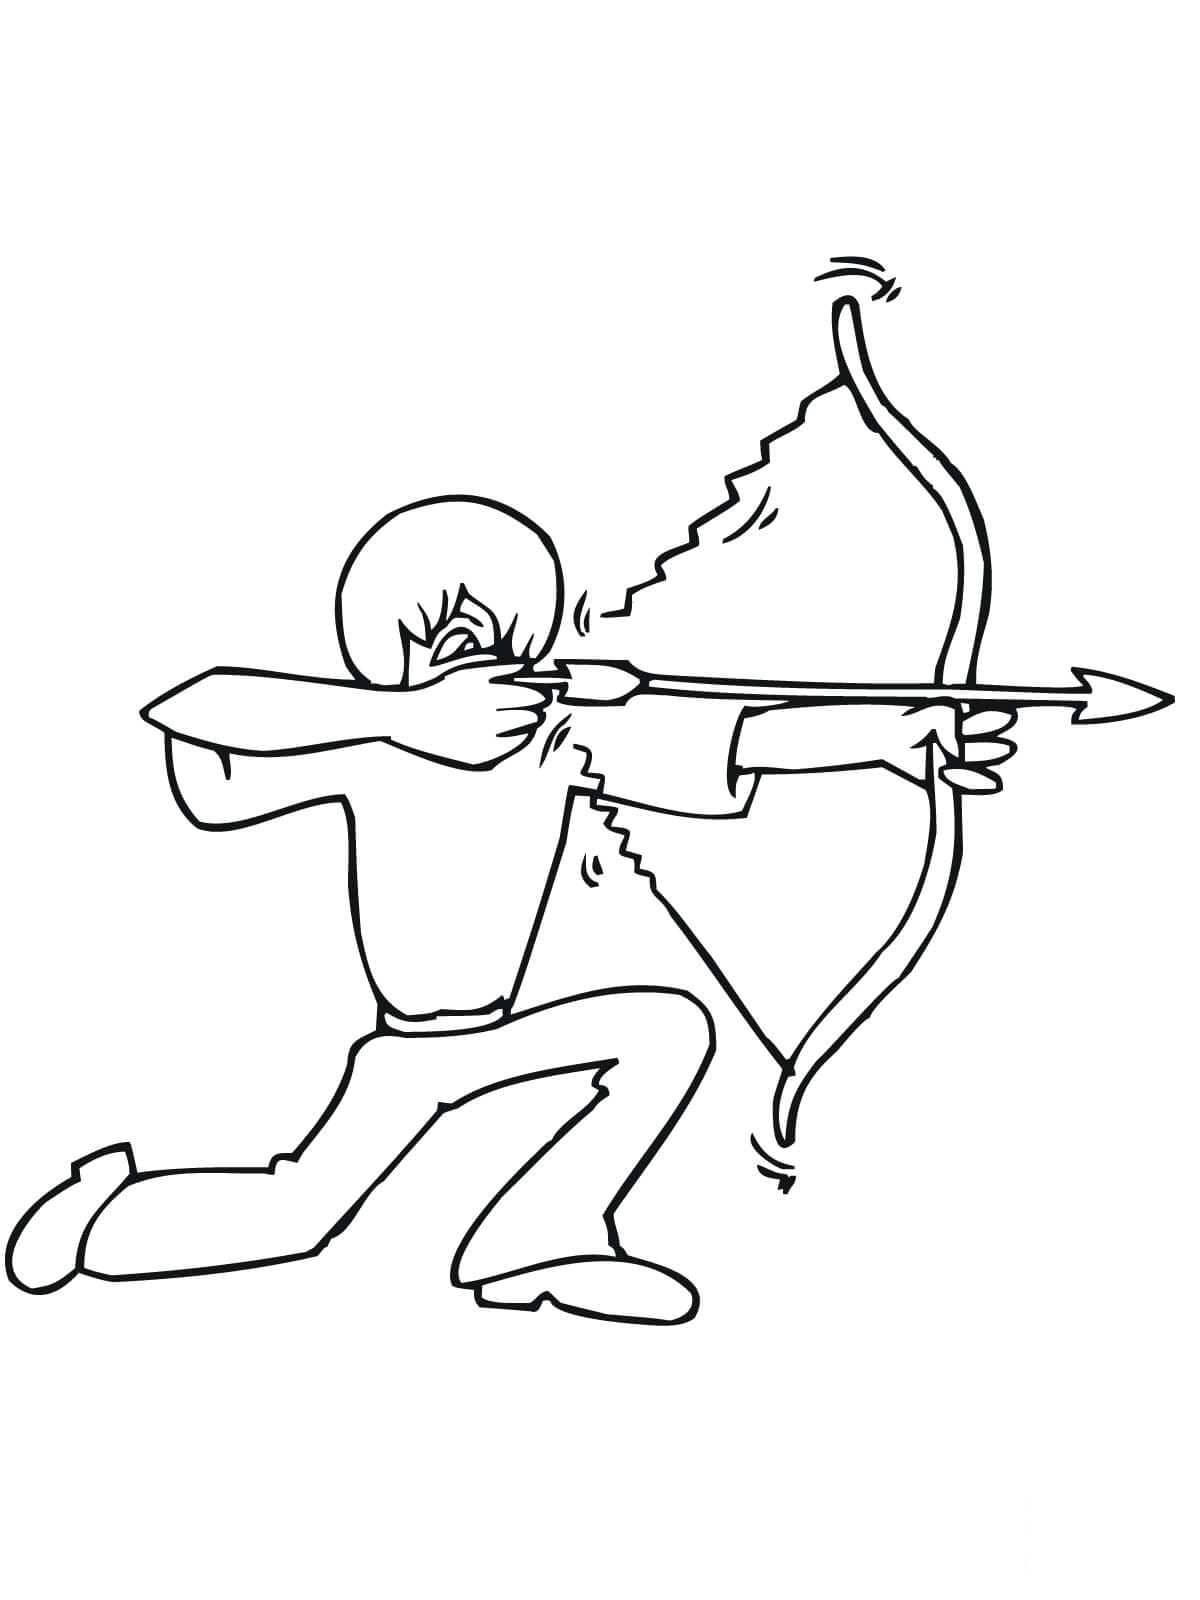 Bow Shooting From The Knee Image